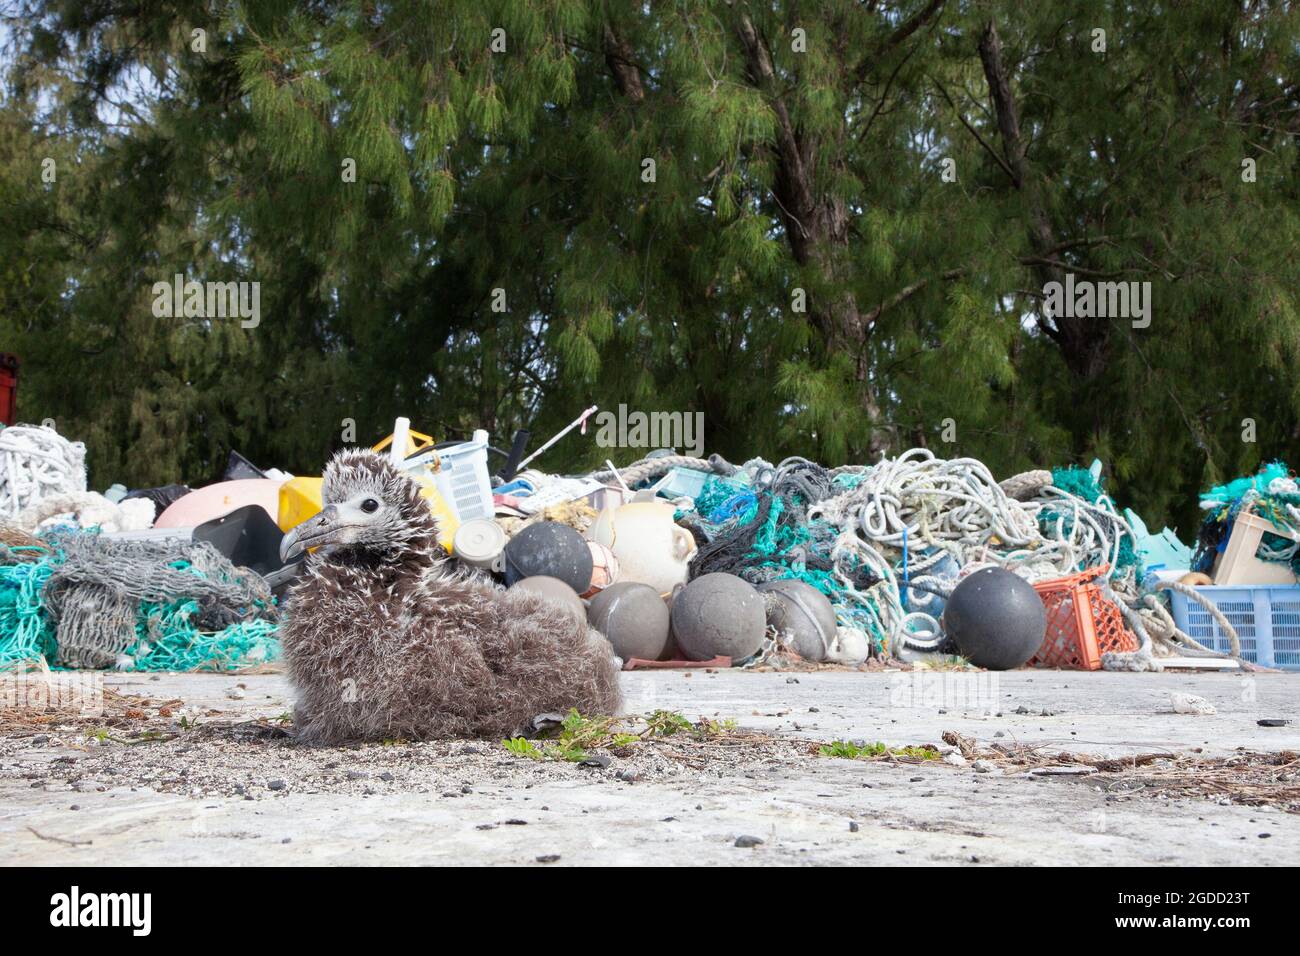 Laysan Albatross chick in nest beside plastic marine waste collected on Pacific Ocean shores to be shipped off island for recycling or disposal. Stock Photo